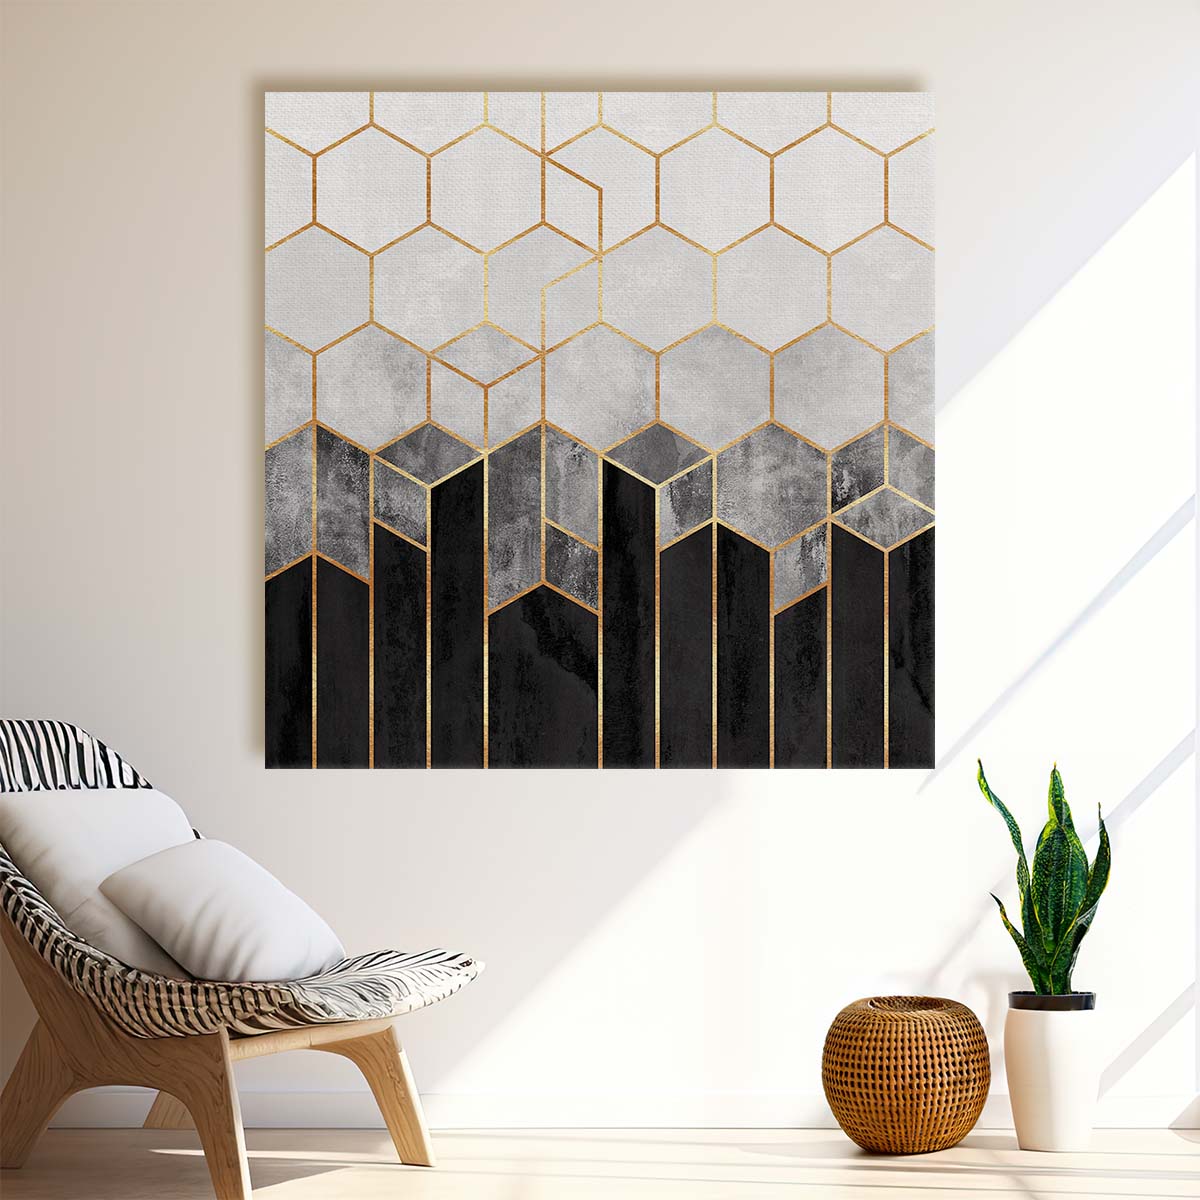 Abstract Geometric Gold & Charcoal Hexagon Illustration Wall Art by Luxuriance Designs. Made in USA.